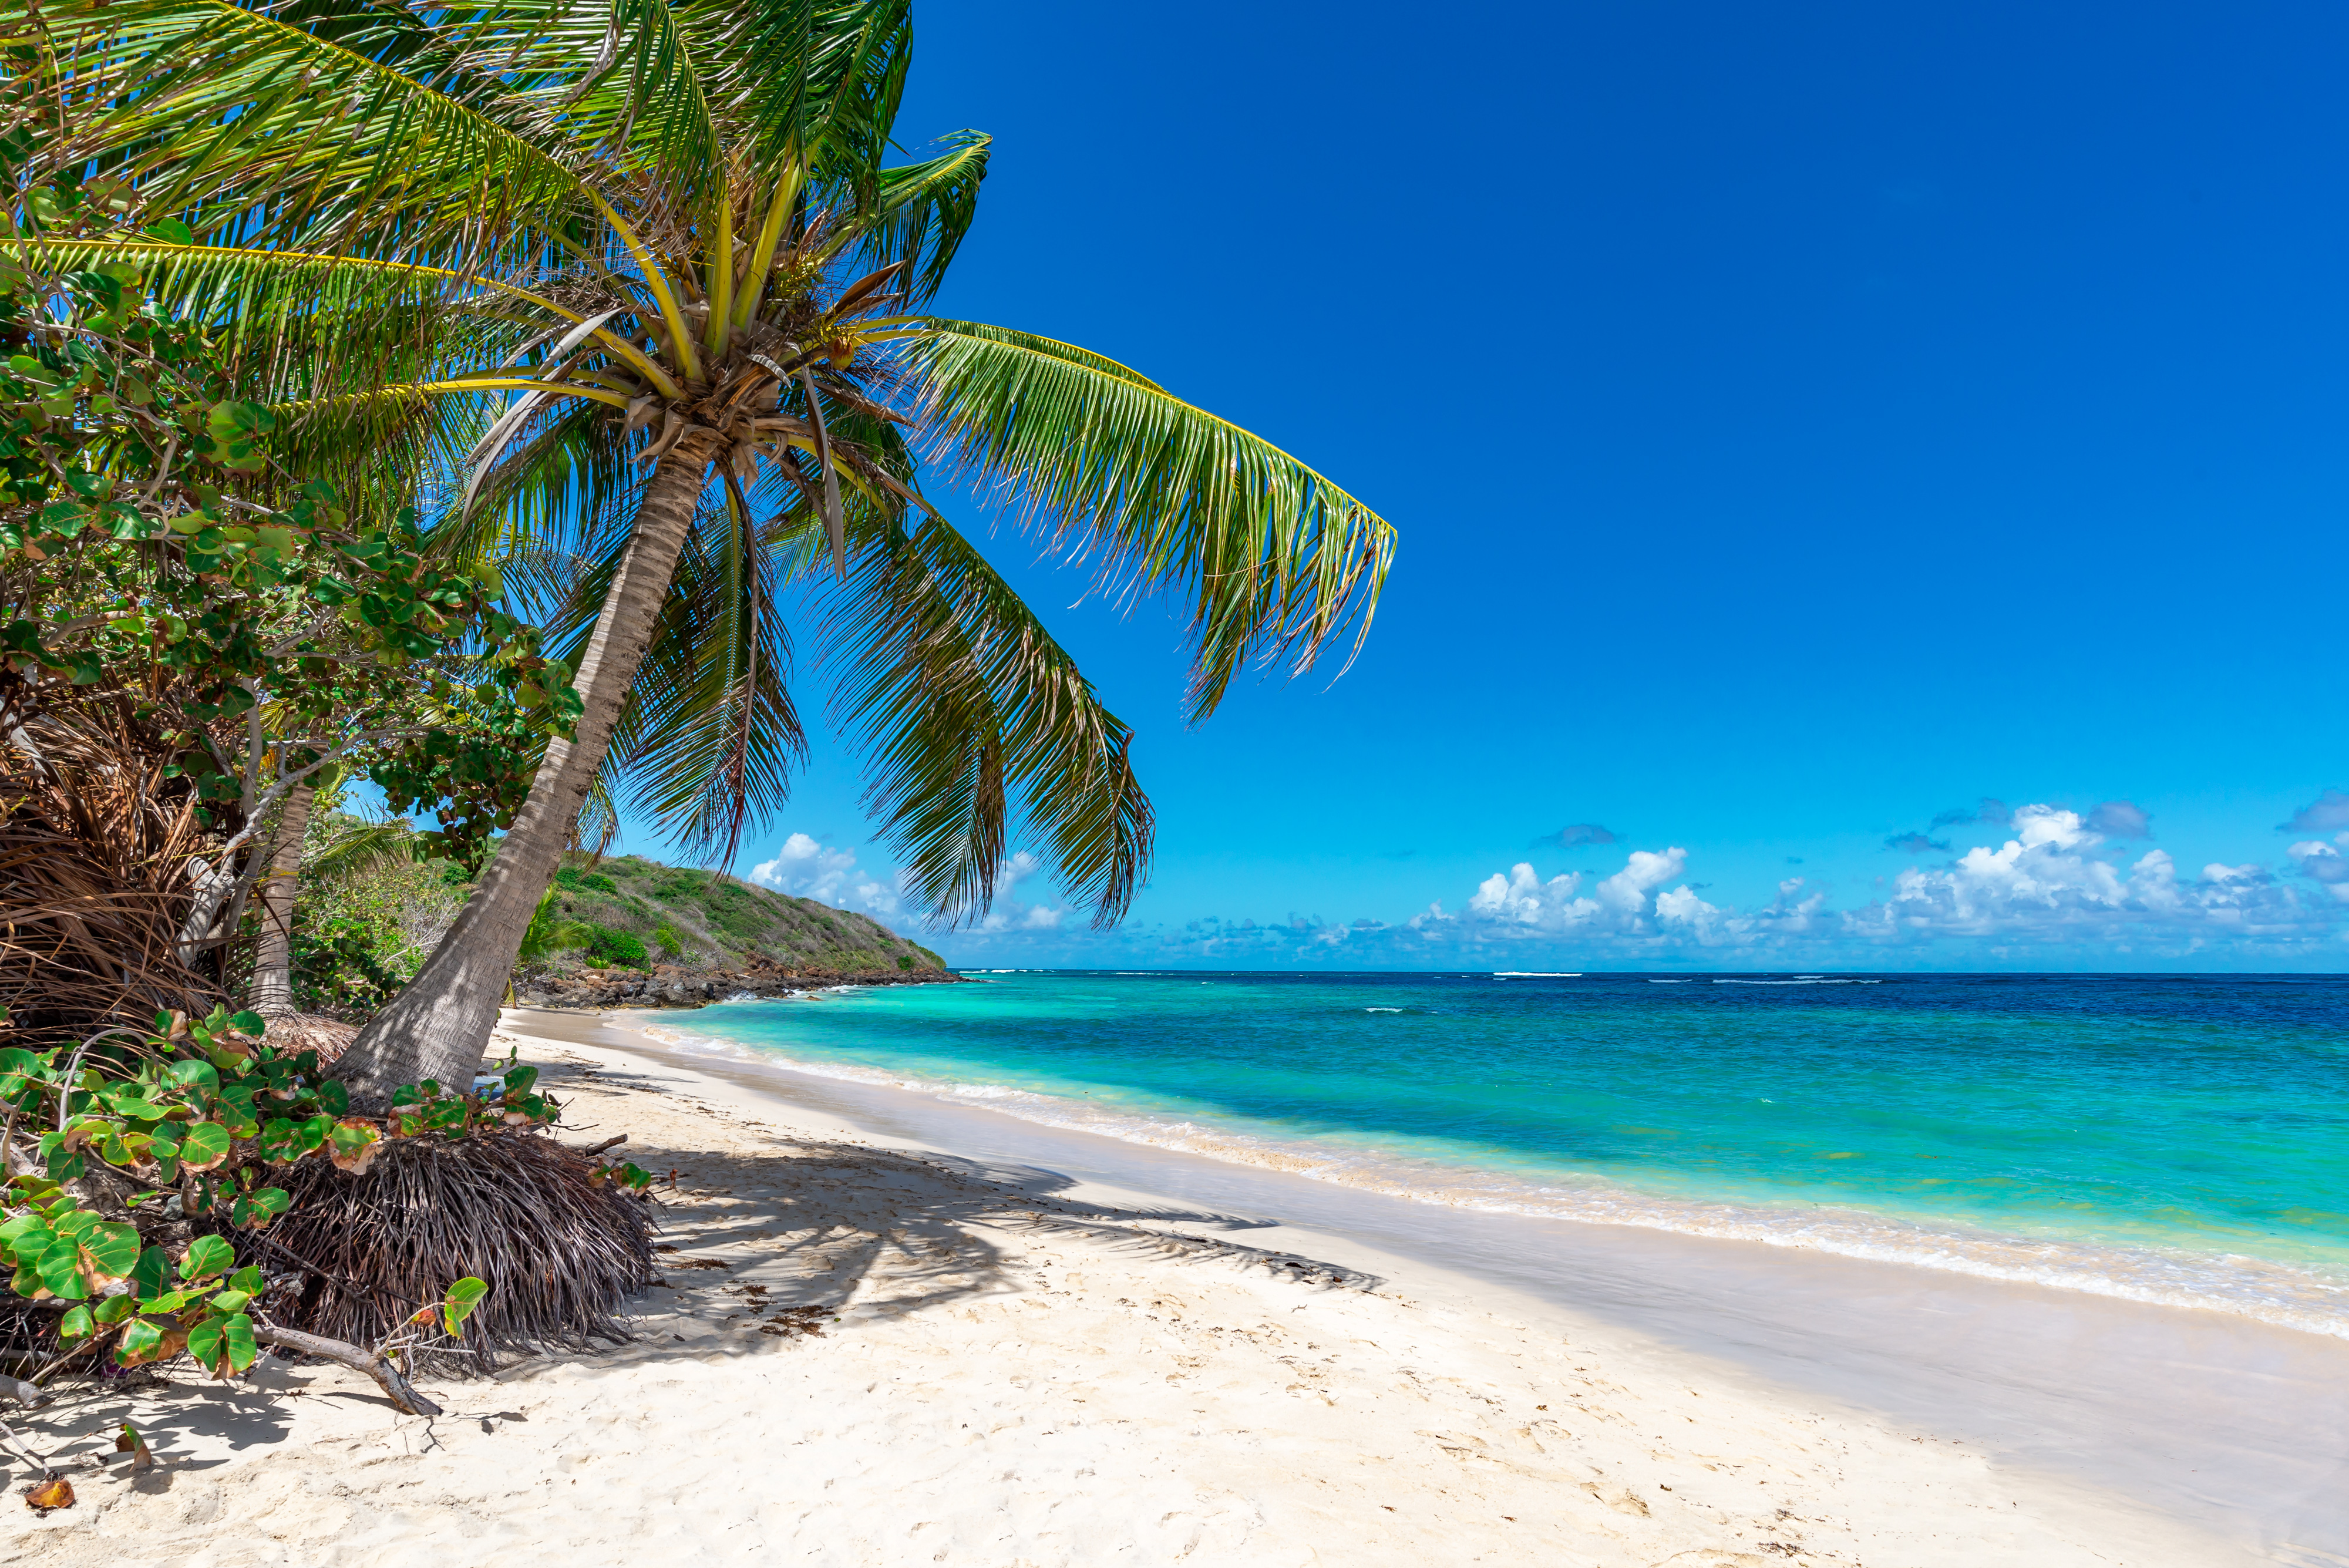 The Caribbean will be perfect for sun lovers all year round